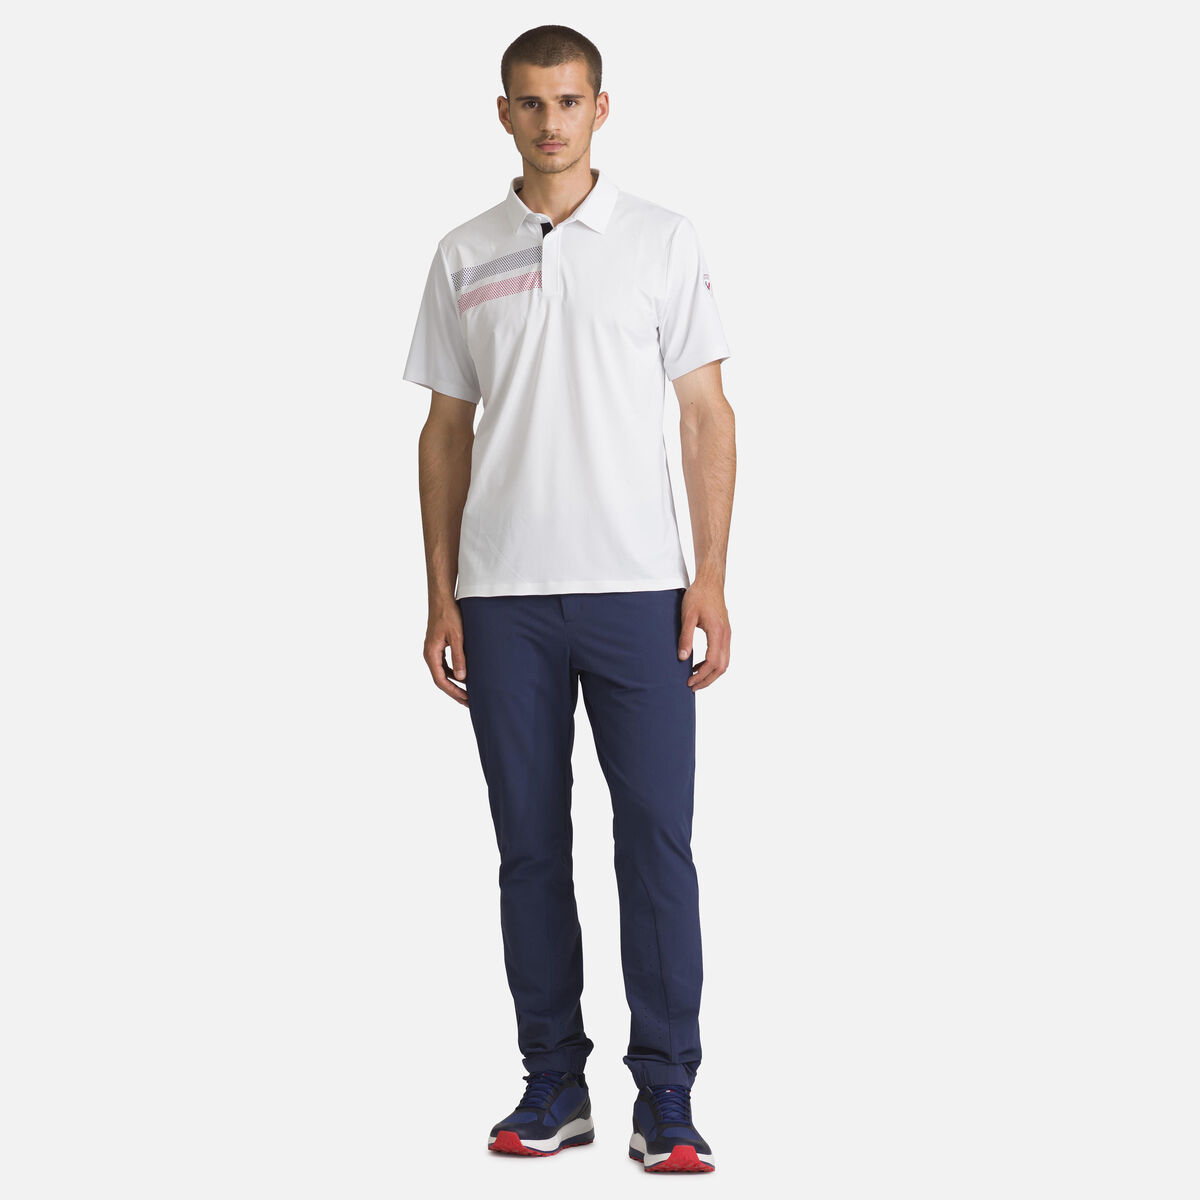 Rossignol Men's lightweight breathable polo shirt white